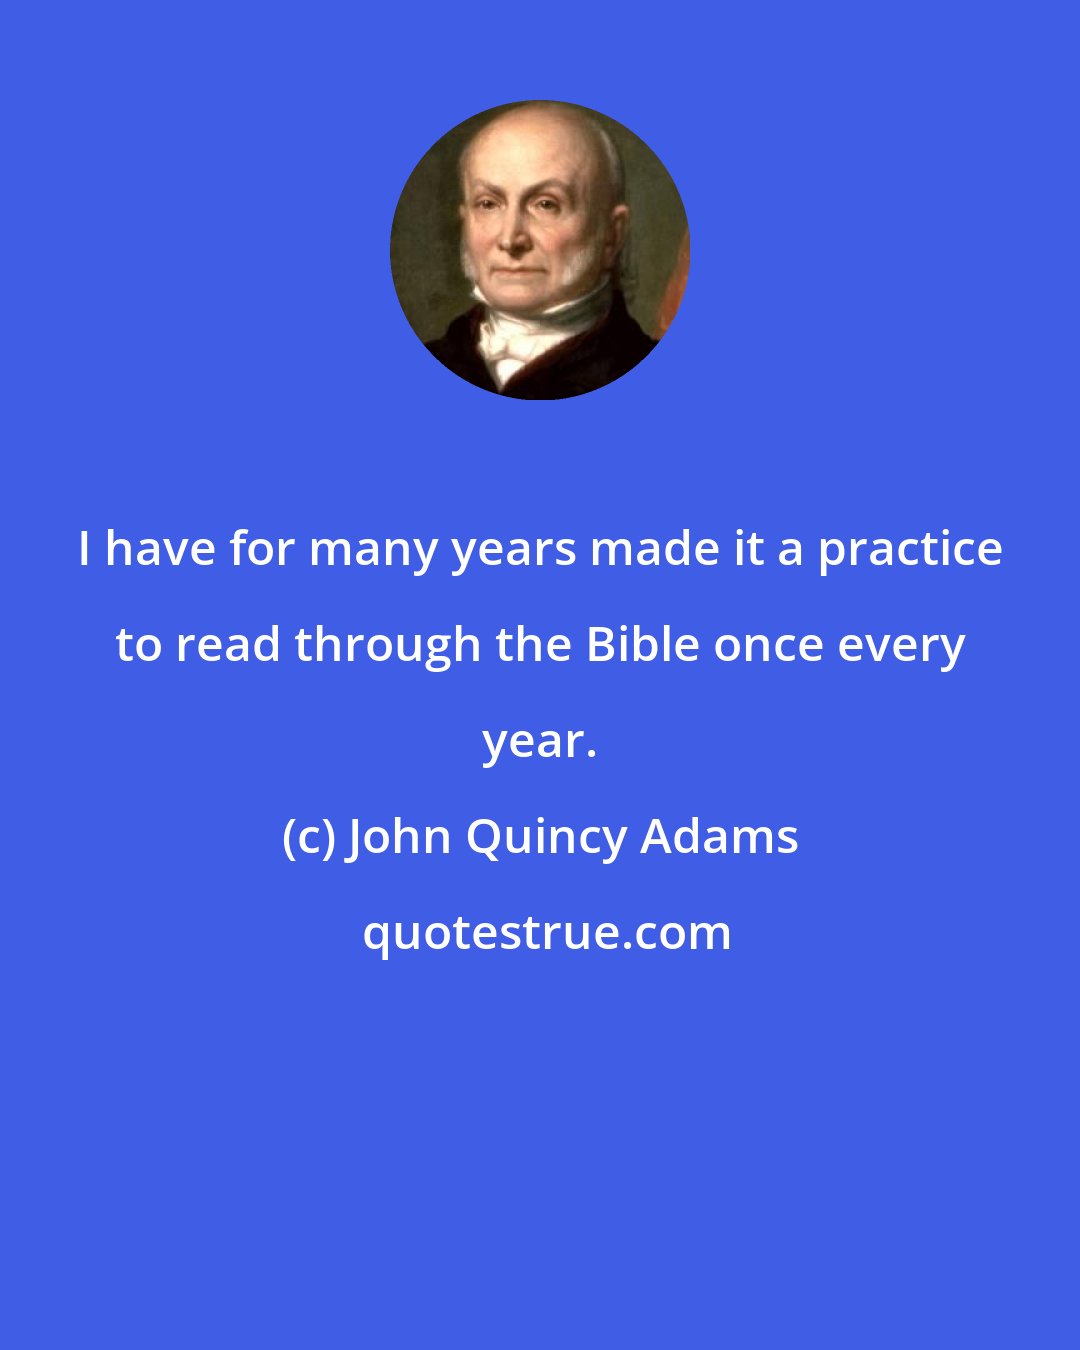 John Quincy Adams: I have for many years made it a practice to read through the Bible once every year.